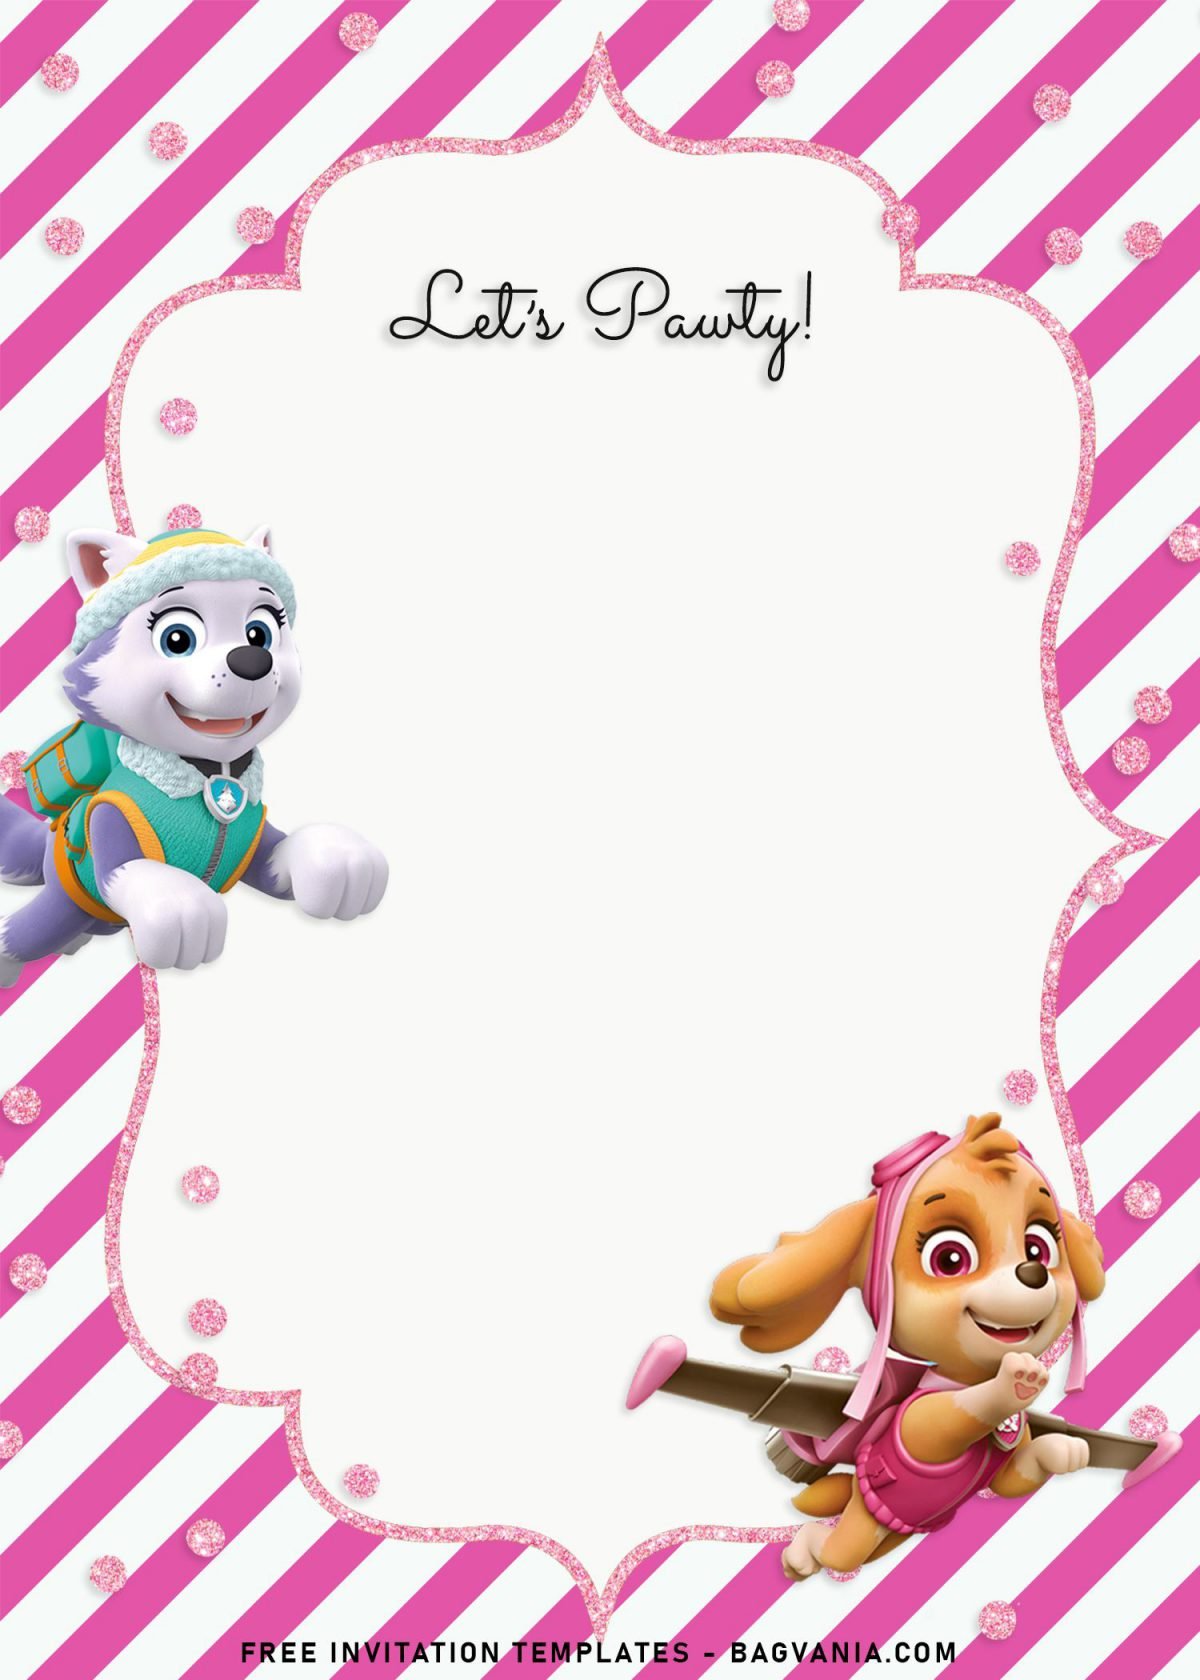 8+ Adorable Skye And Everest Paw Patrol Birthday Invitation Templates and has pink glitter